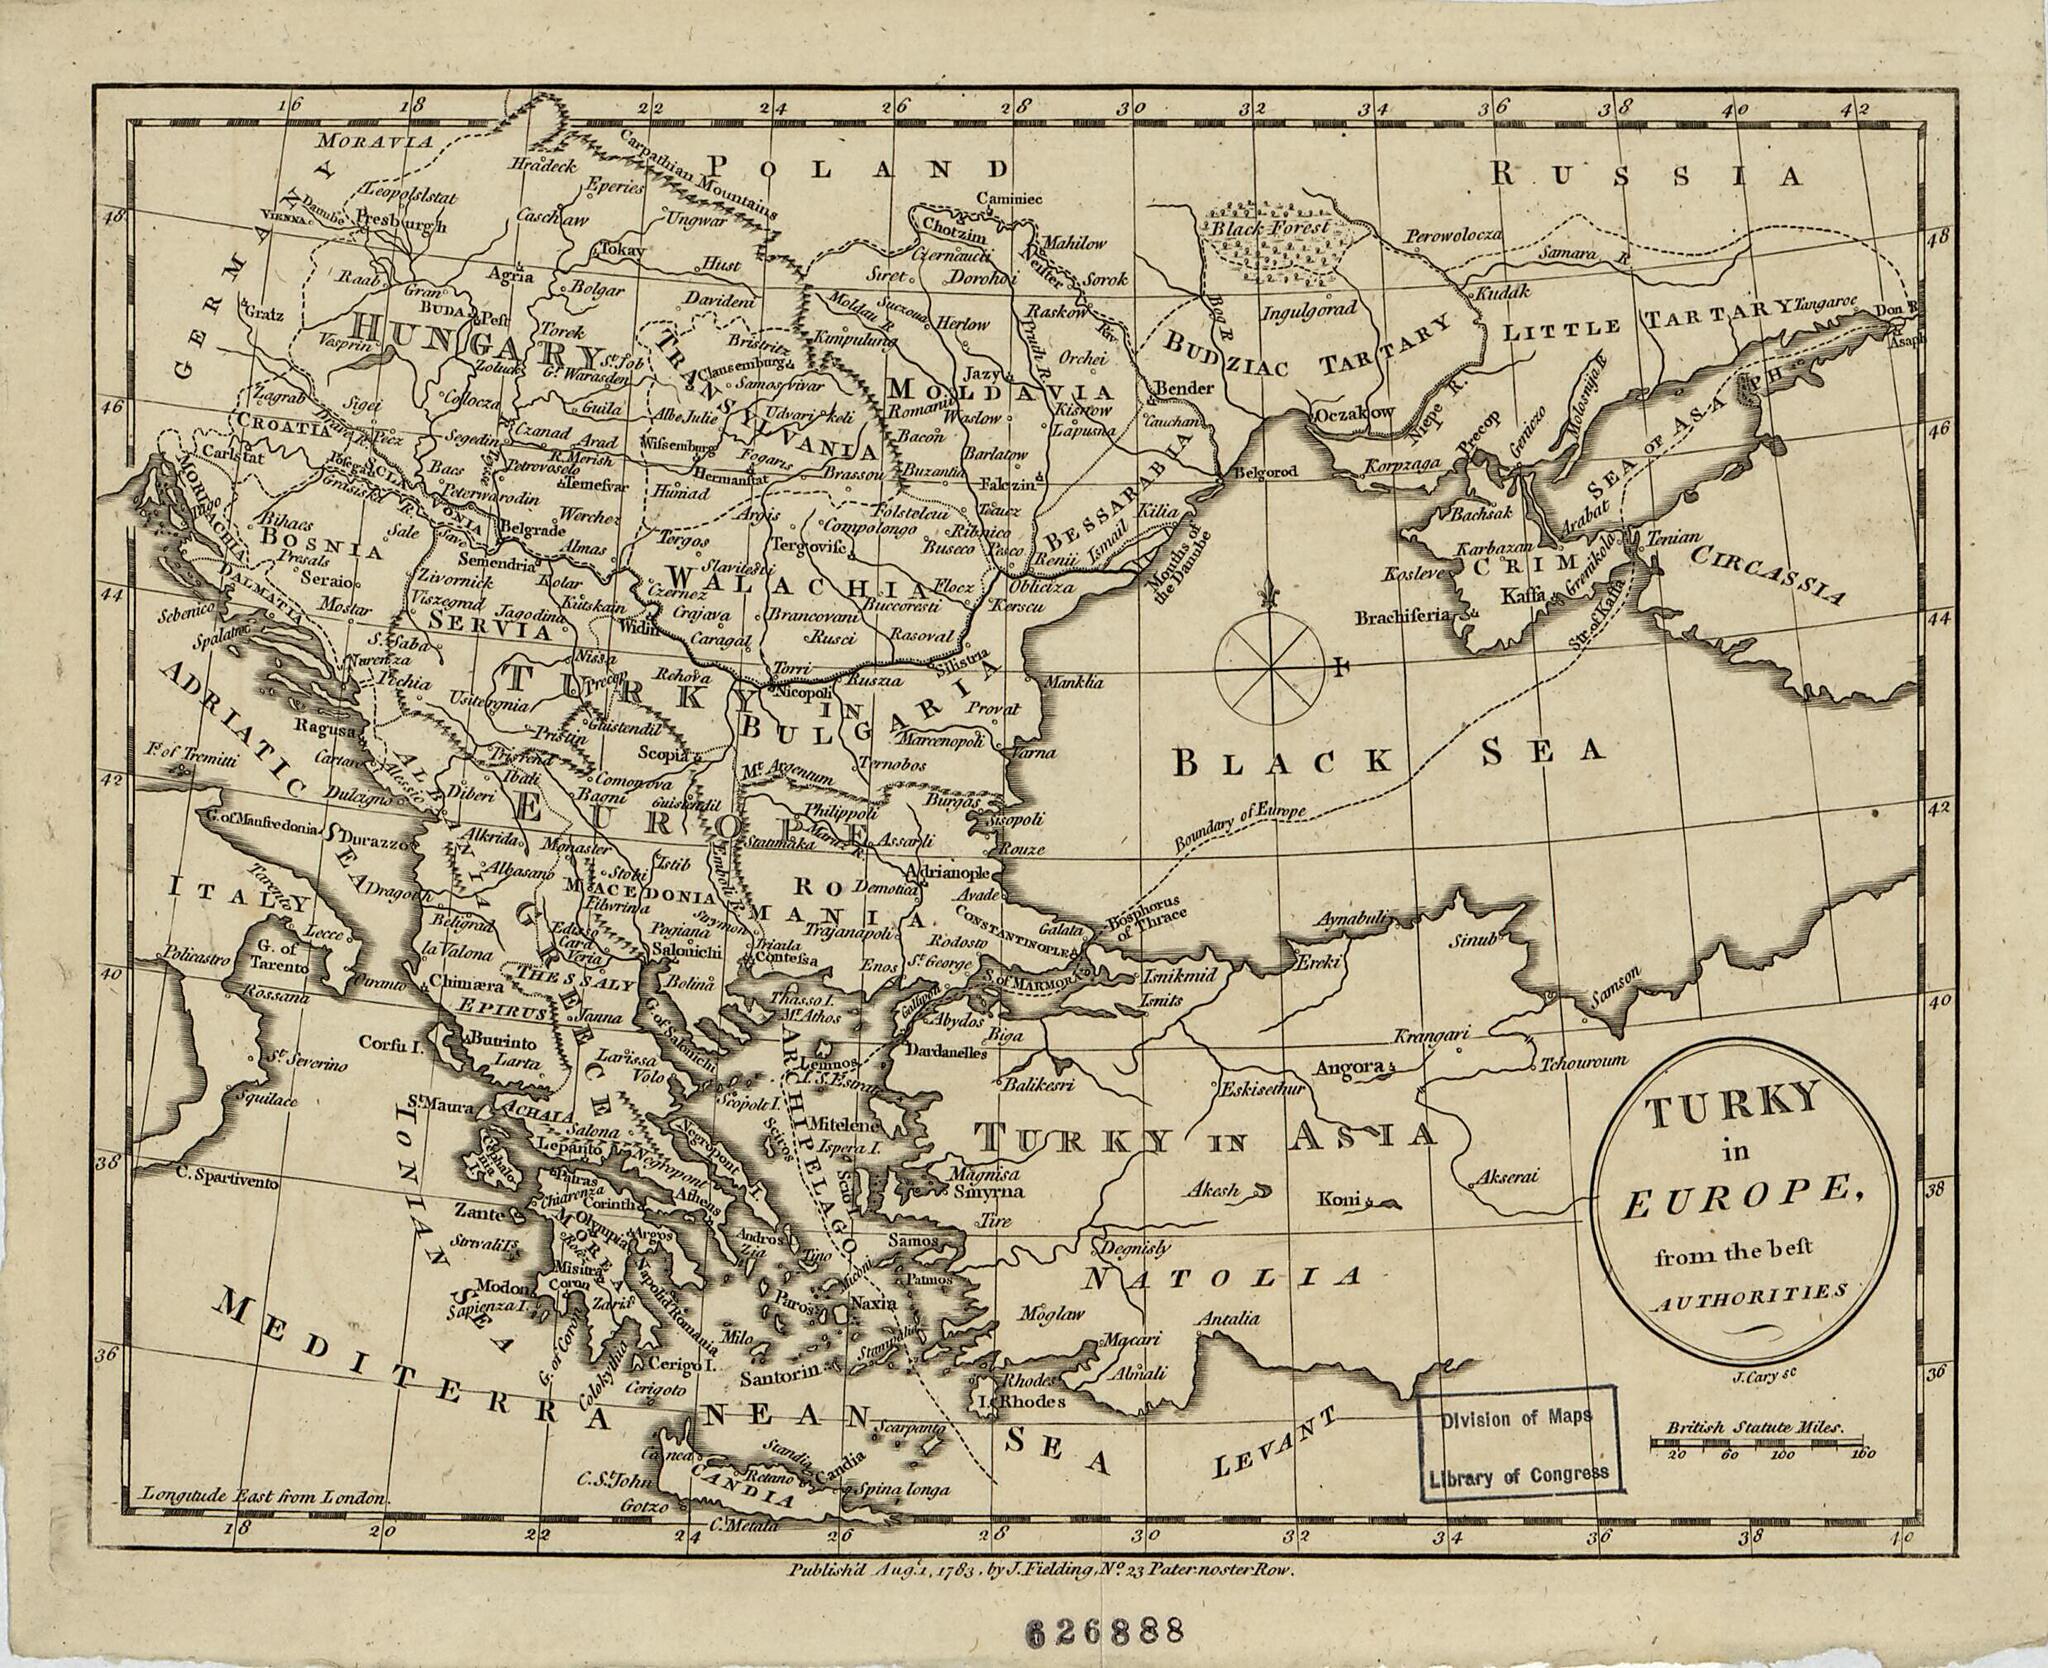 This old map of Turky In Europe : from the Best Authorities (Turkey In Europe) from 1783 was created by John Cary, John Fielding in 1783